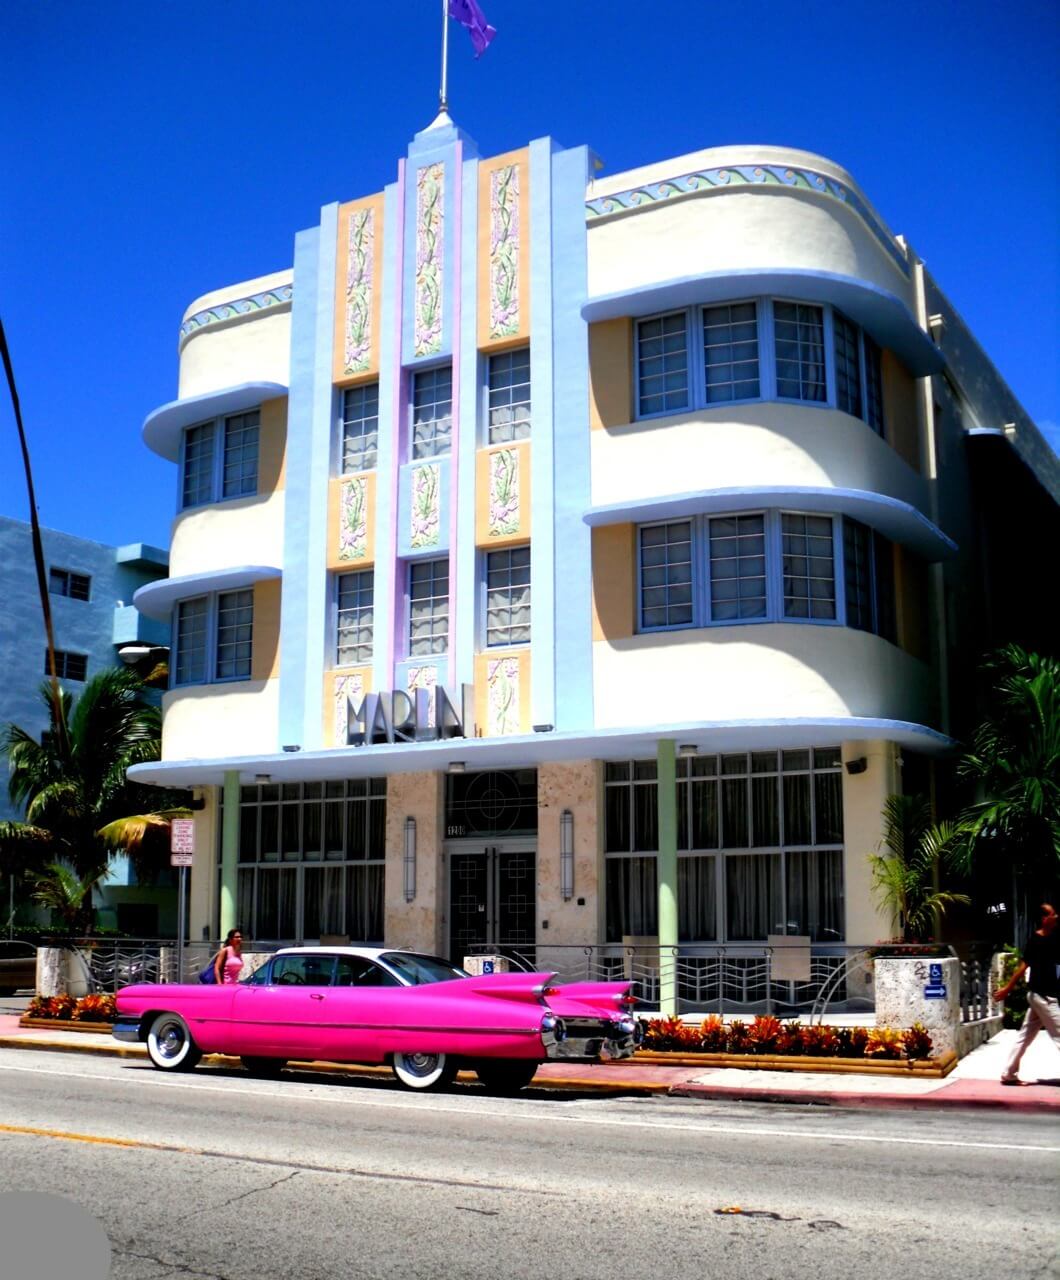 Blocky three-story building with a hot-pink sports car parked out front.